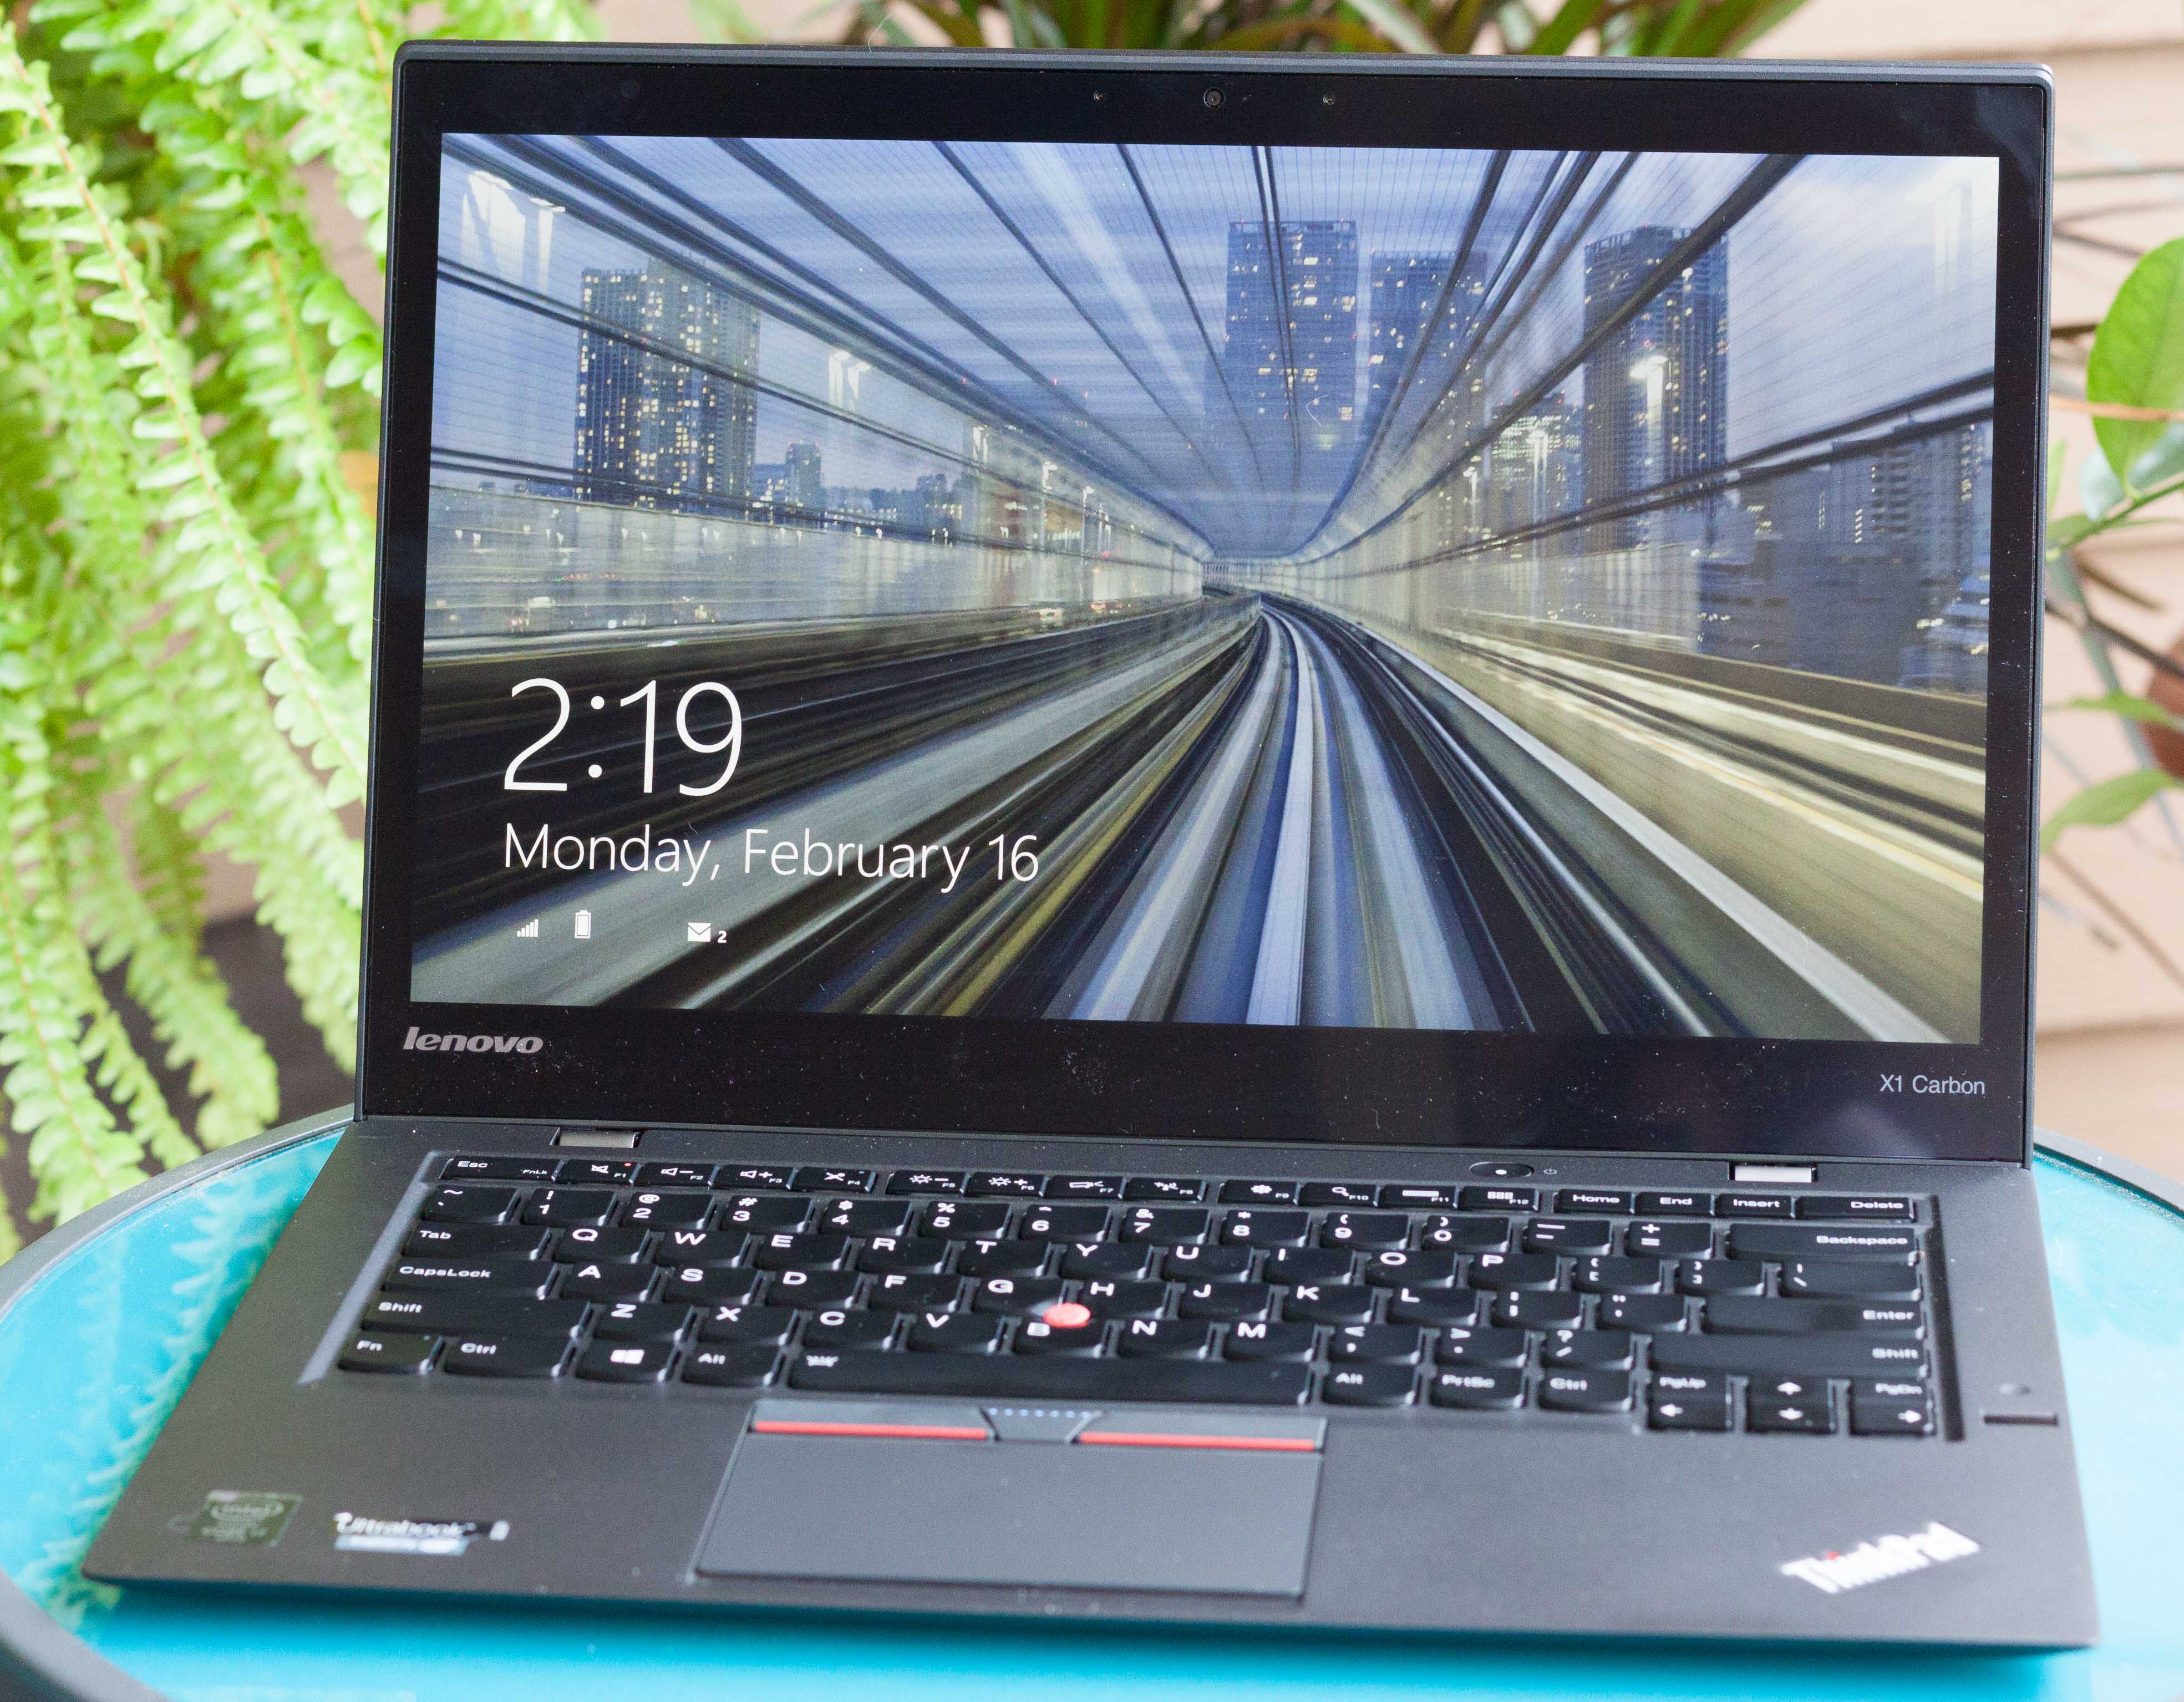 ThinkPad X1 Carbon review: A fine heir to the ThinkPad name | Ars Technica